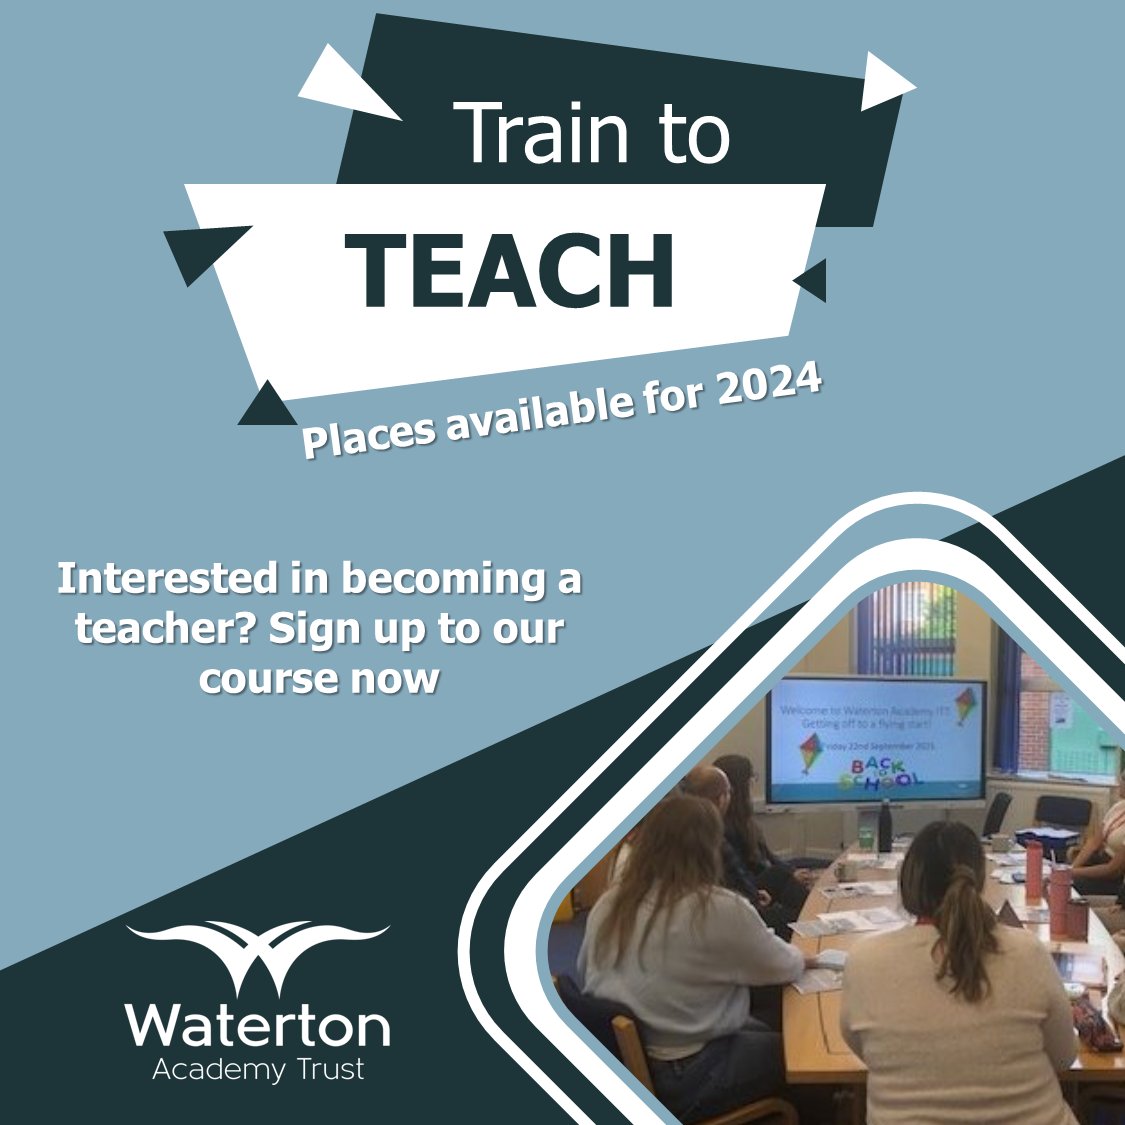 🎓Interested in training to teach? 🌟Join our outstanding Initial Teacher Training course, in partnership with Leeds Trinity University 🗺️Our schools are located within the Wakefield and Barnsley area 🔗Find out more about our 2024 course on our website: watertonacademytrust.org/initial-teache…